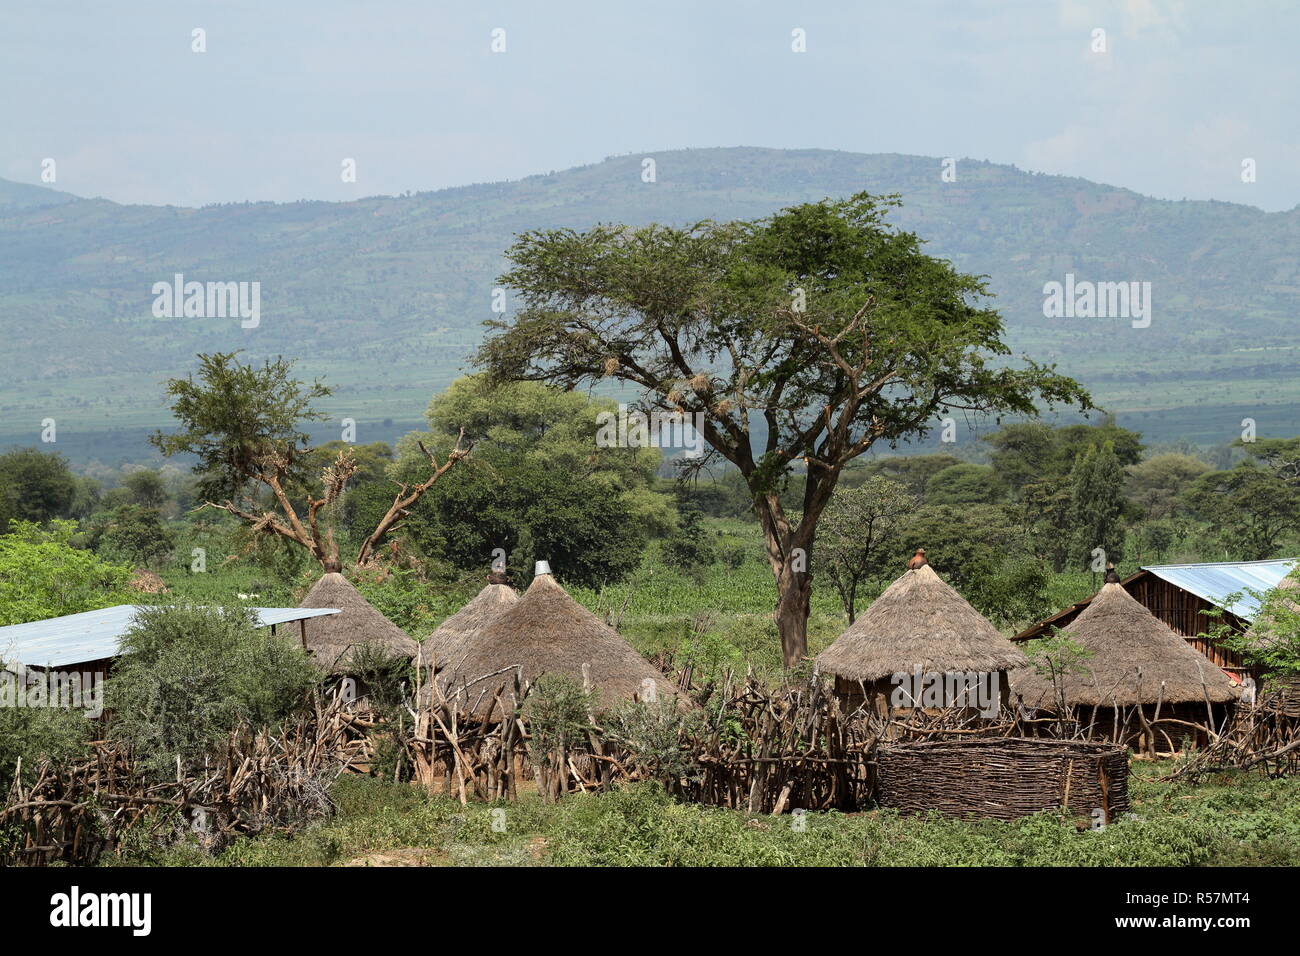 traditional straw huts in the omo valley of ethiopia Stock Photo